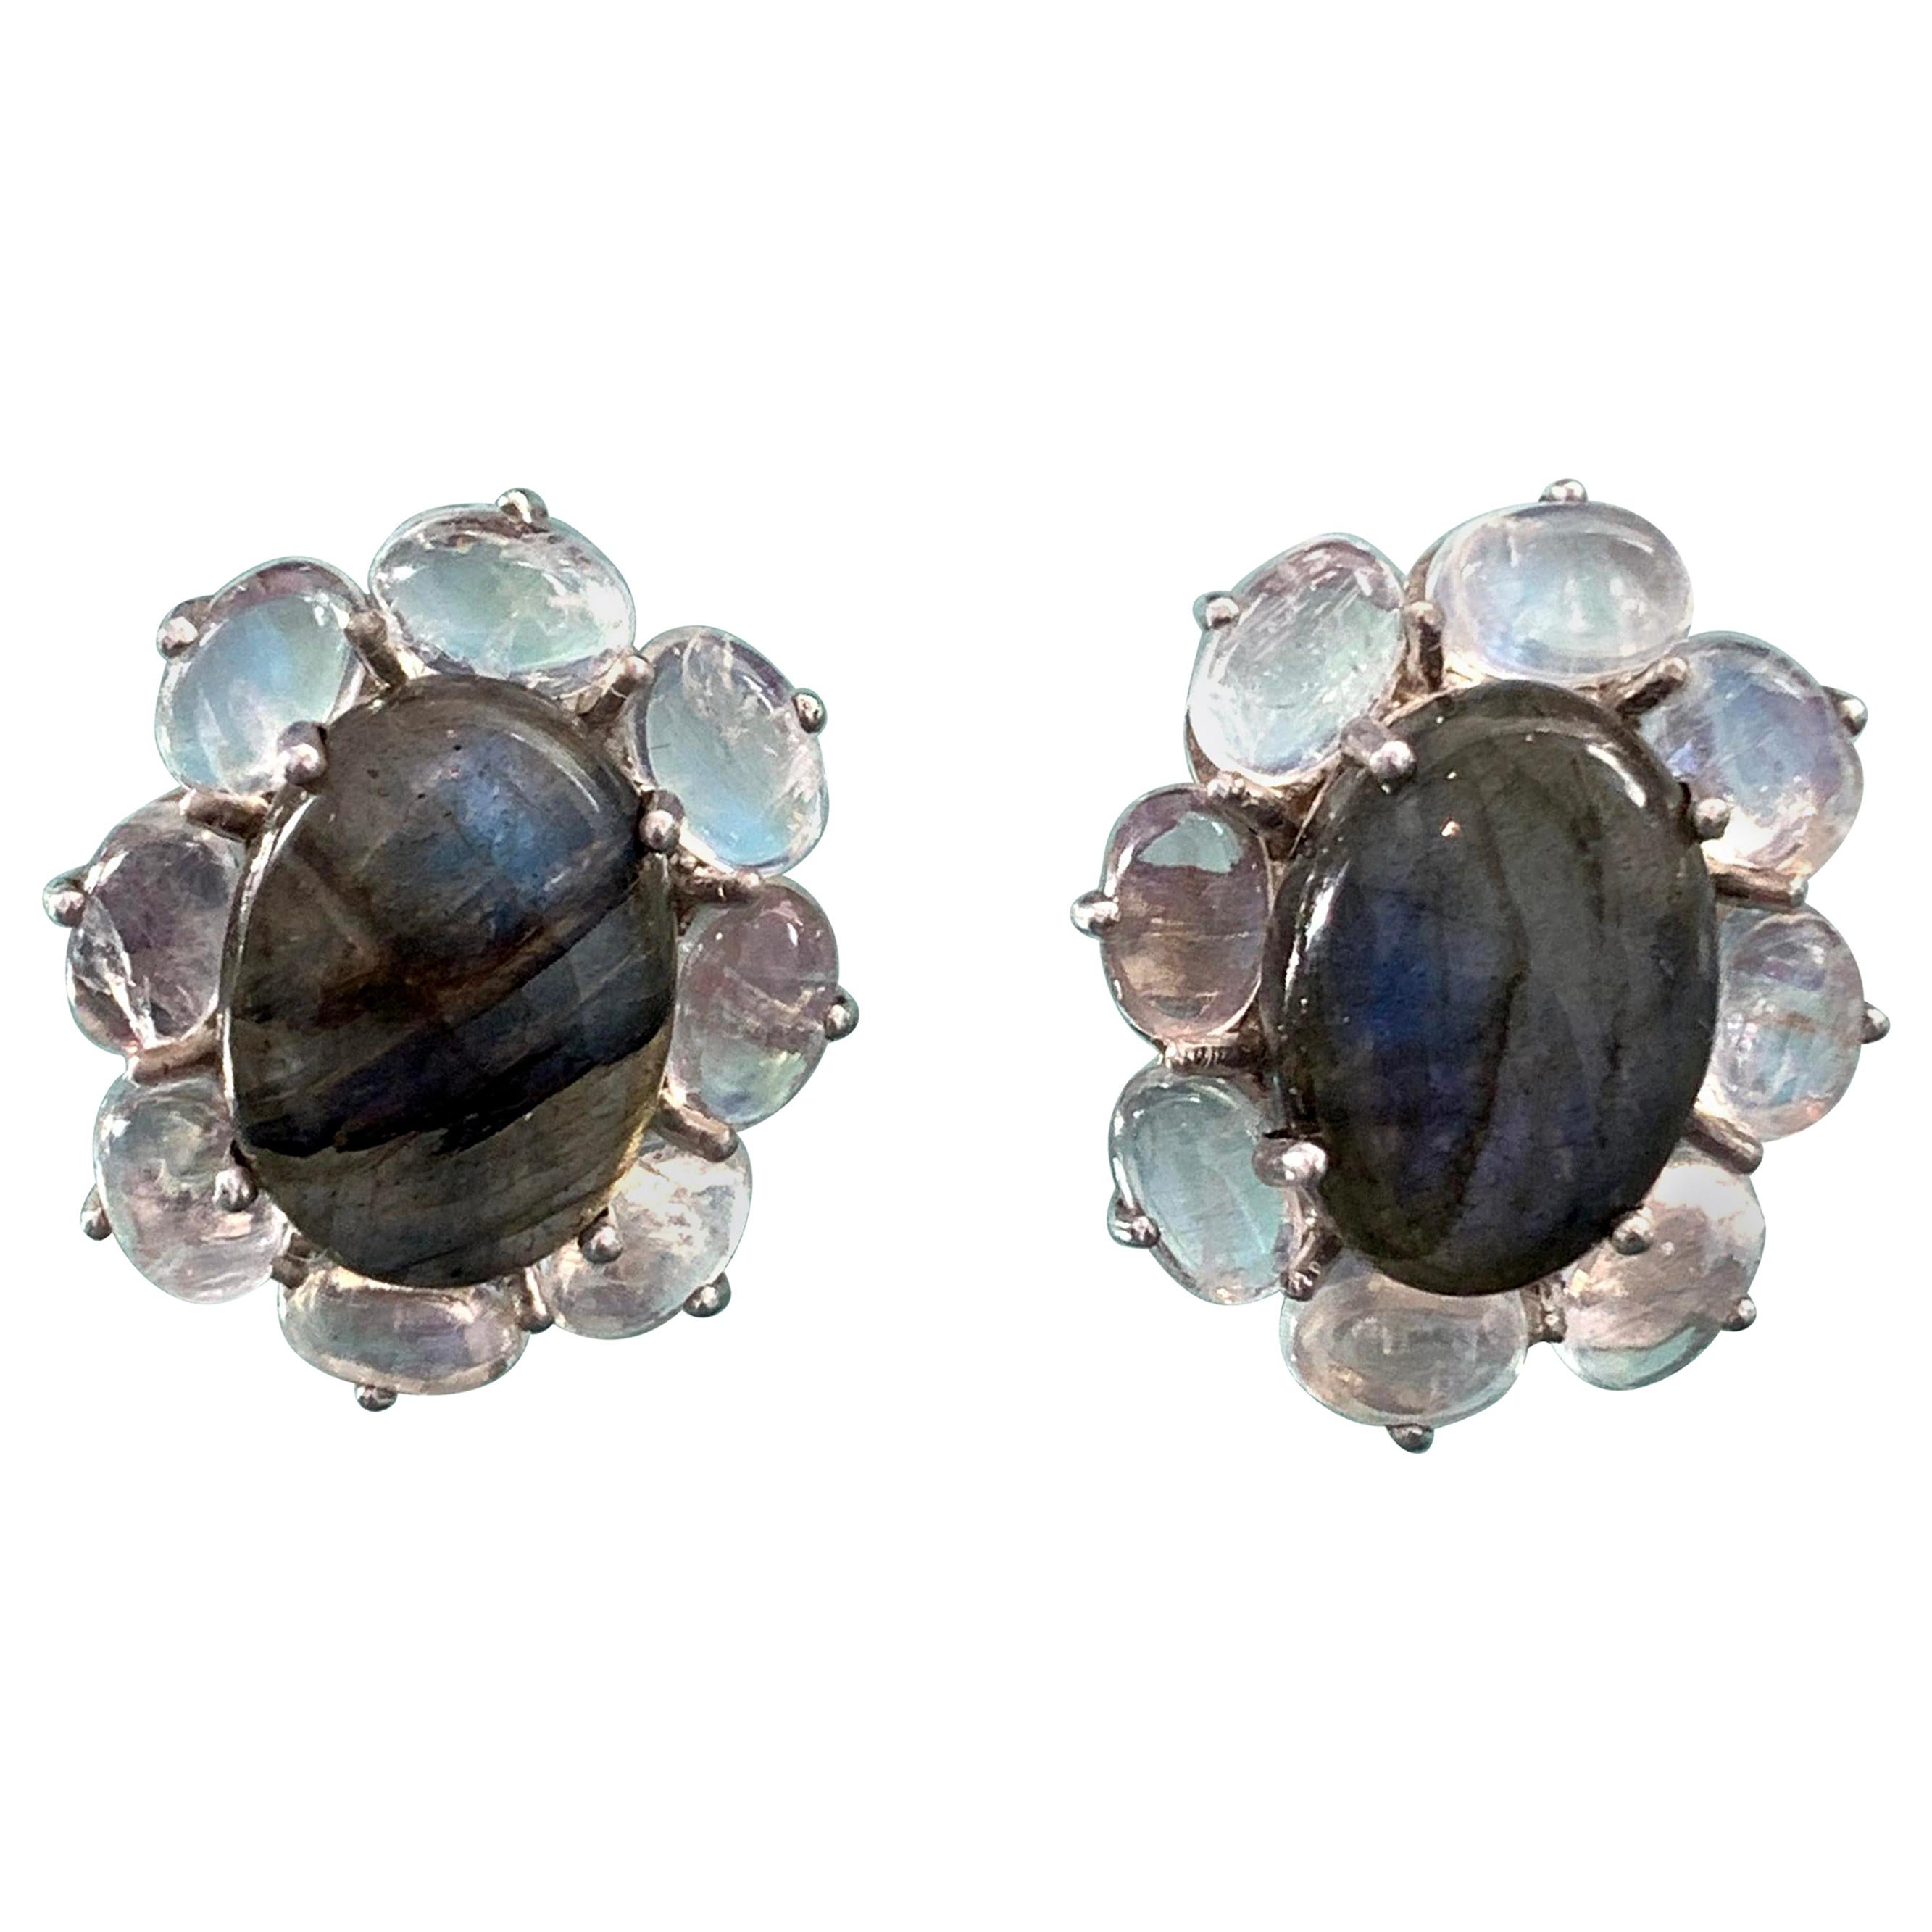 Oval Cabochon Labradorite and Rainbow Moonstone Button Earrings